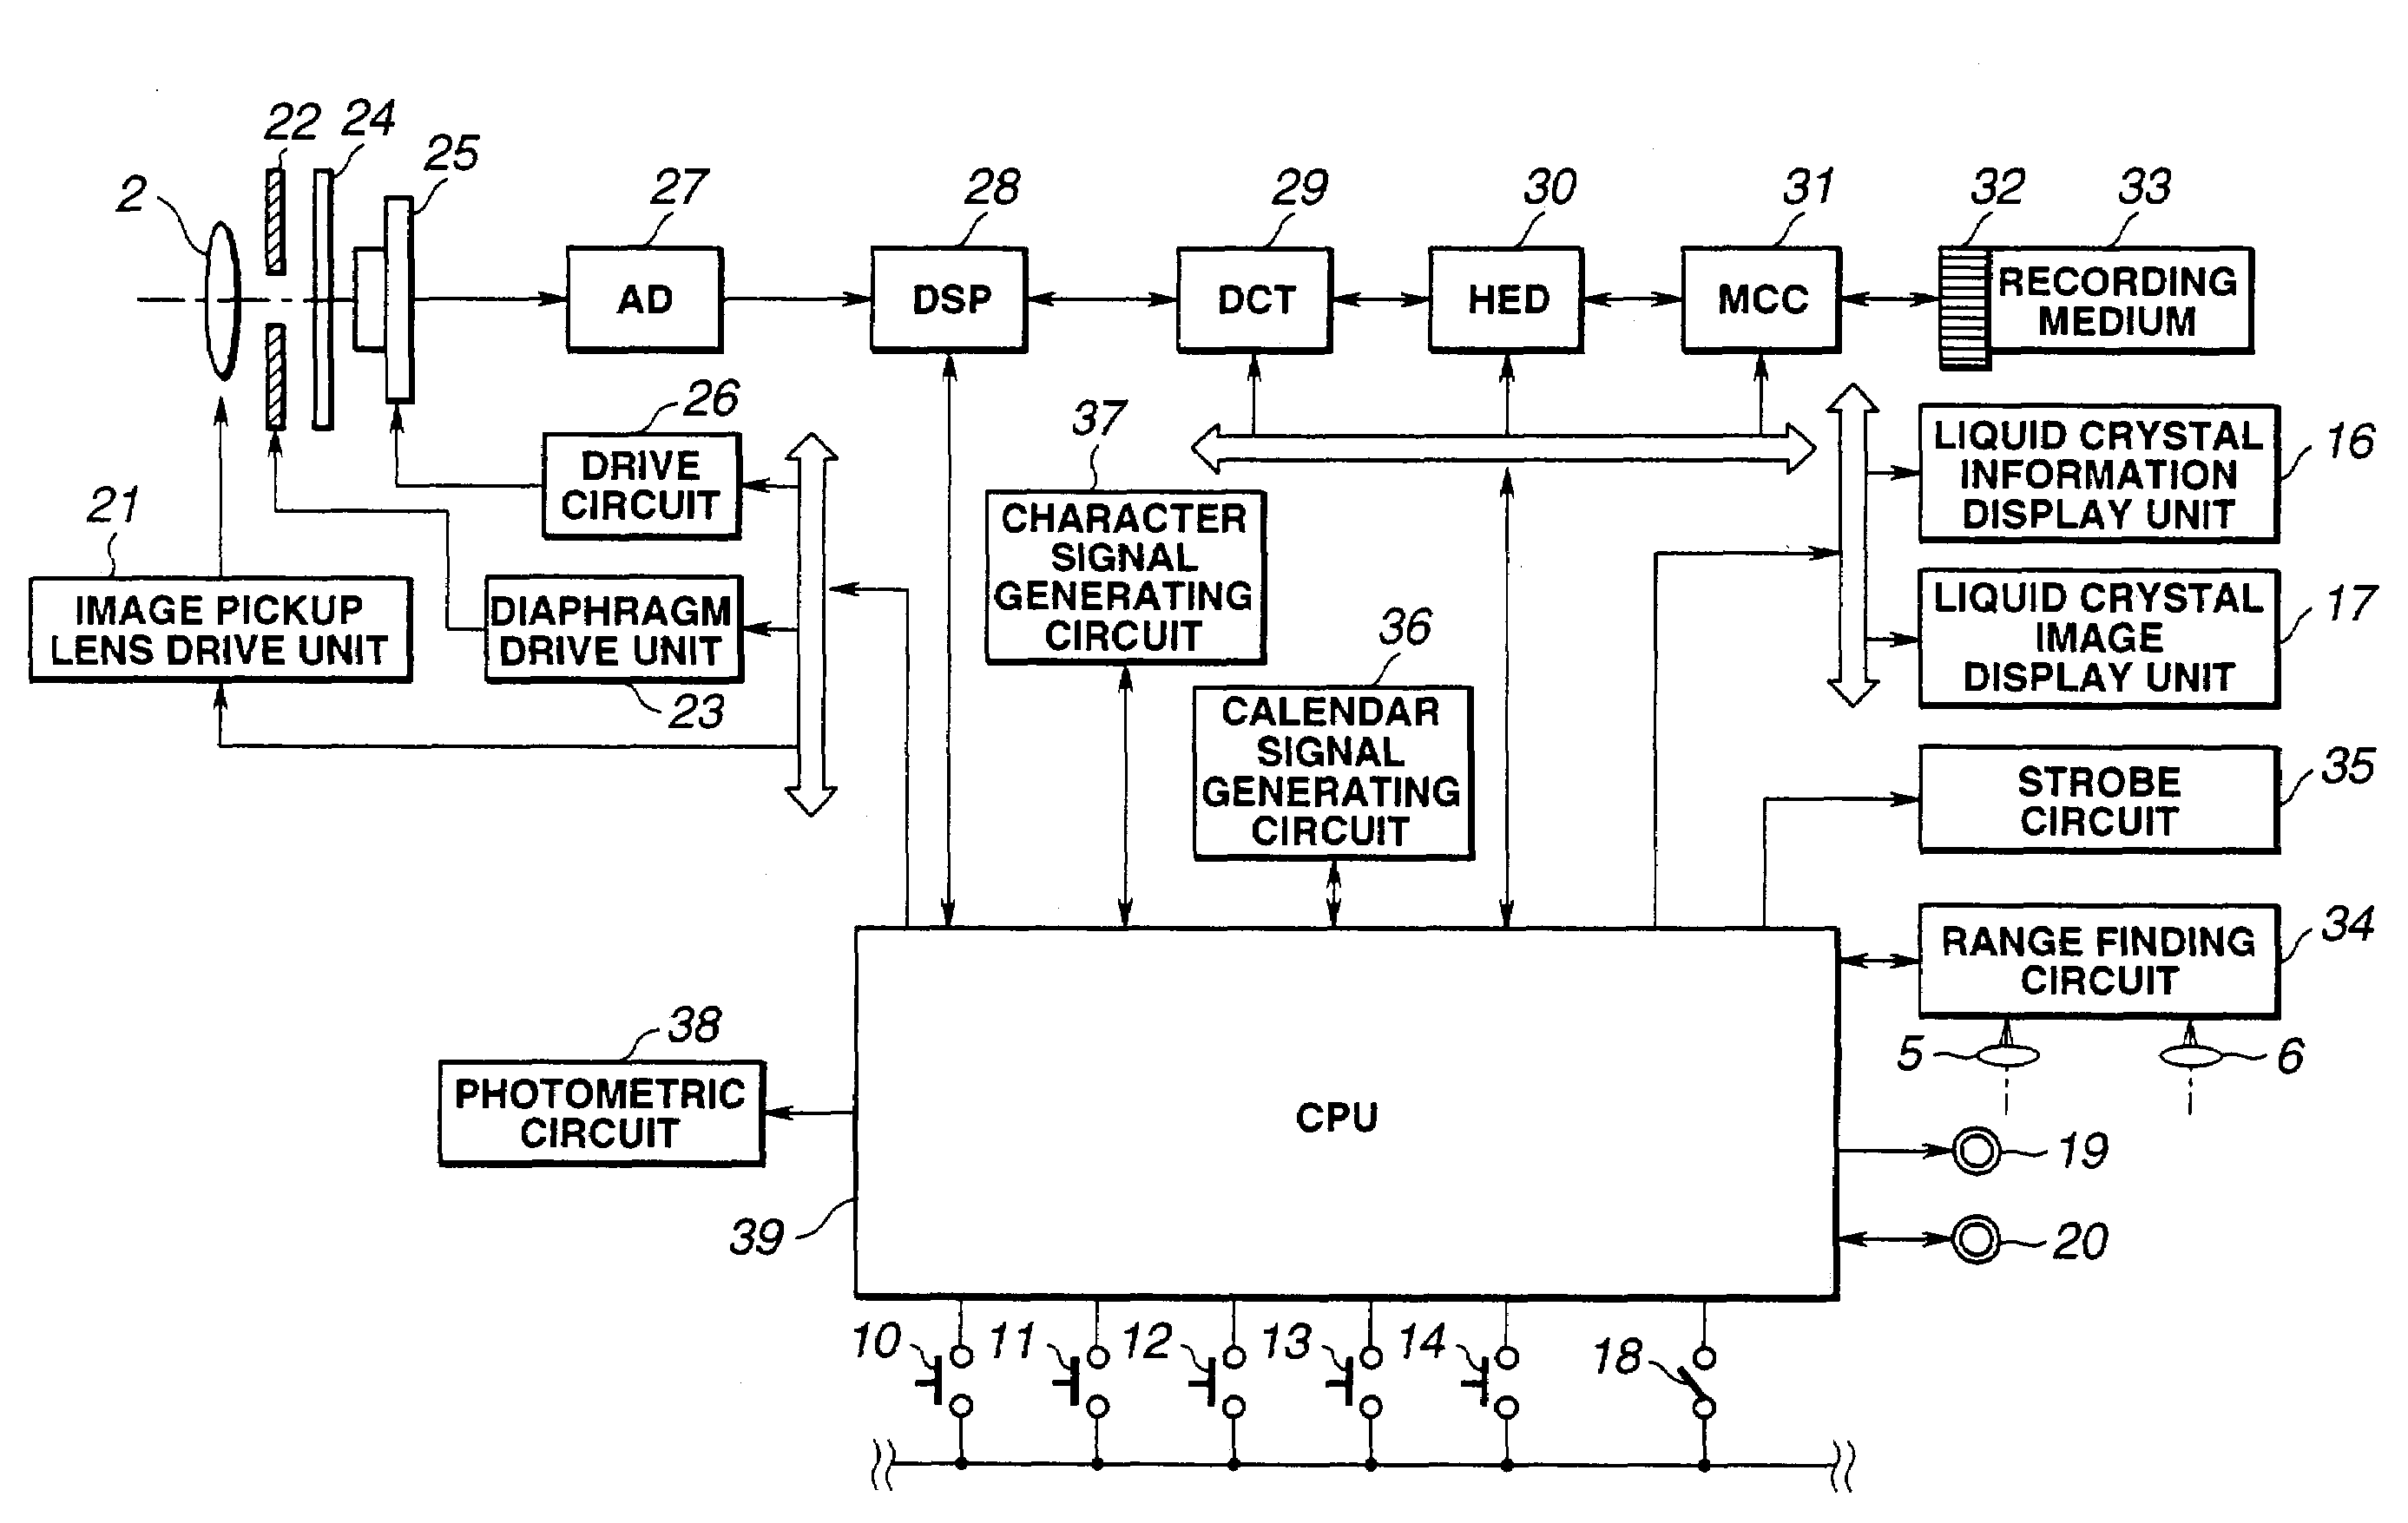 Electronic image pickup apparatus allowing a longer exposure time